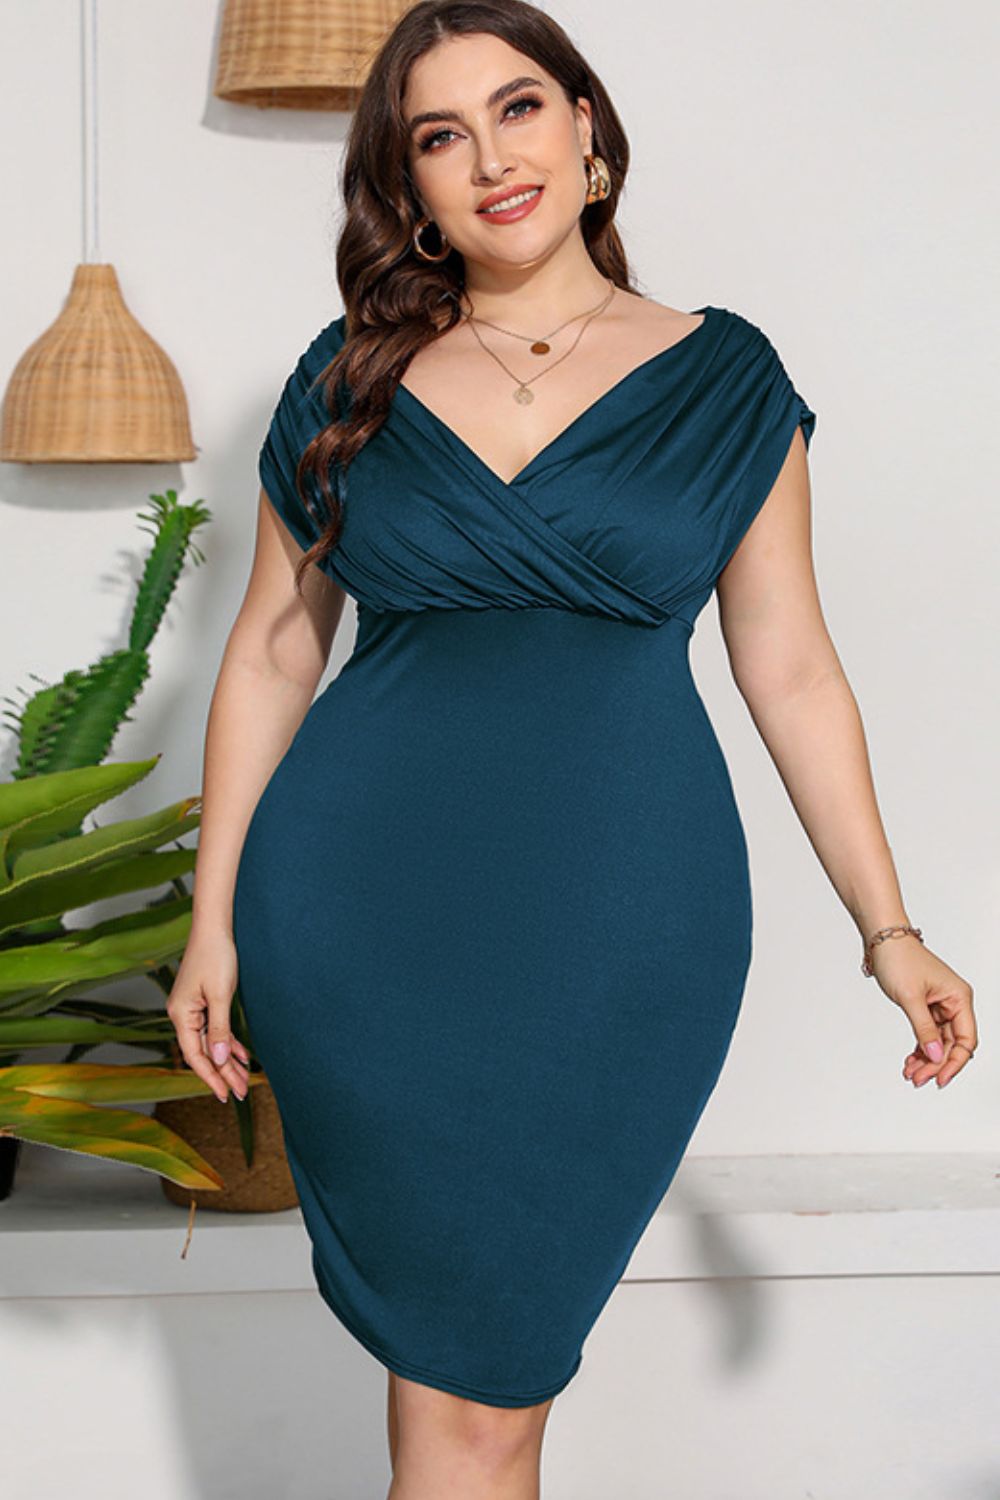 Trendsi Cupid Beauty Supplies Peacock Blue / L Woman Cocktail Dresses Plus Size Ruched V-Neck Dress